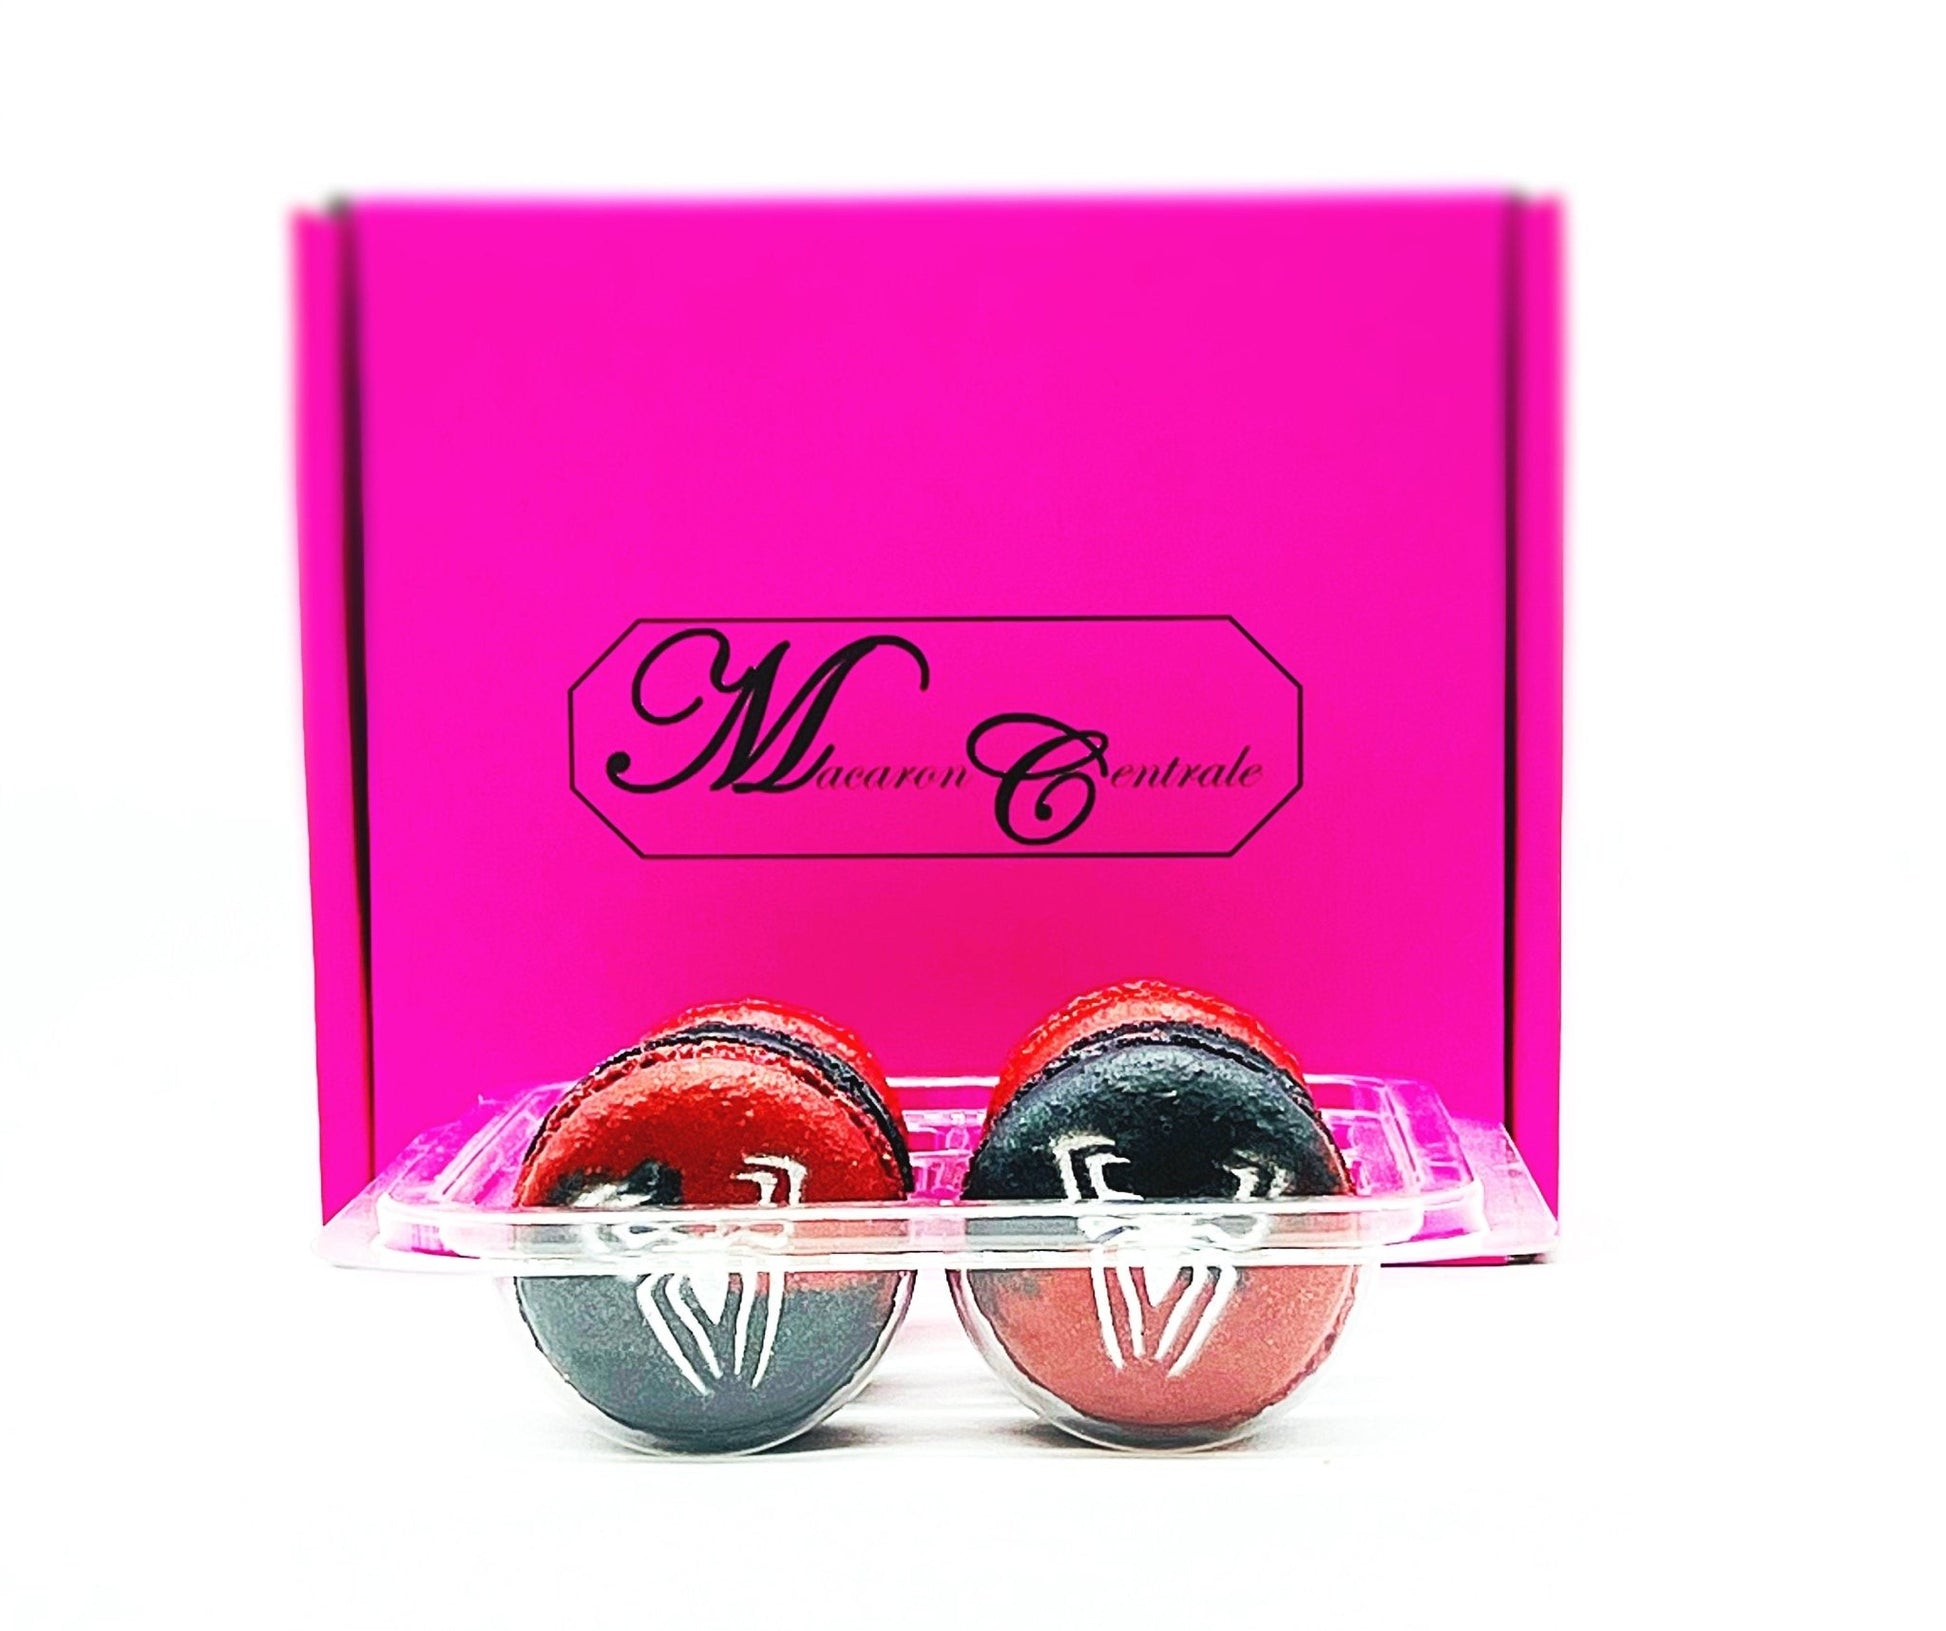 French Macaron Tribute To Spiderman | Available in 6, 12 or 24 Pack - Macaron Centrale6 pack